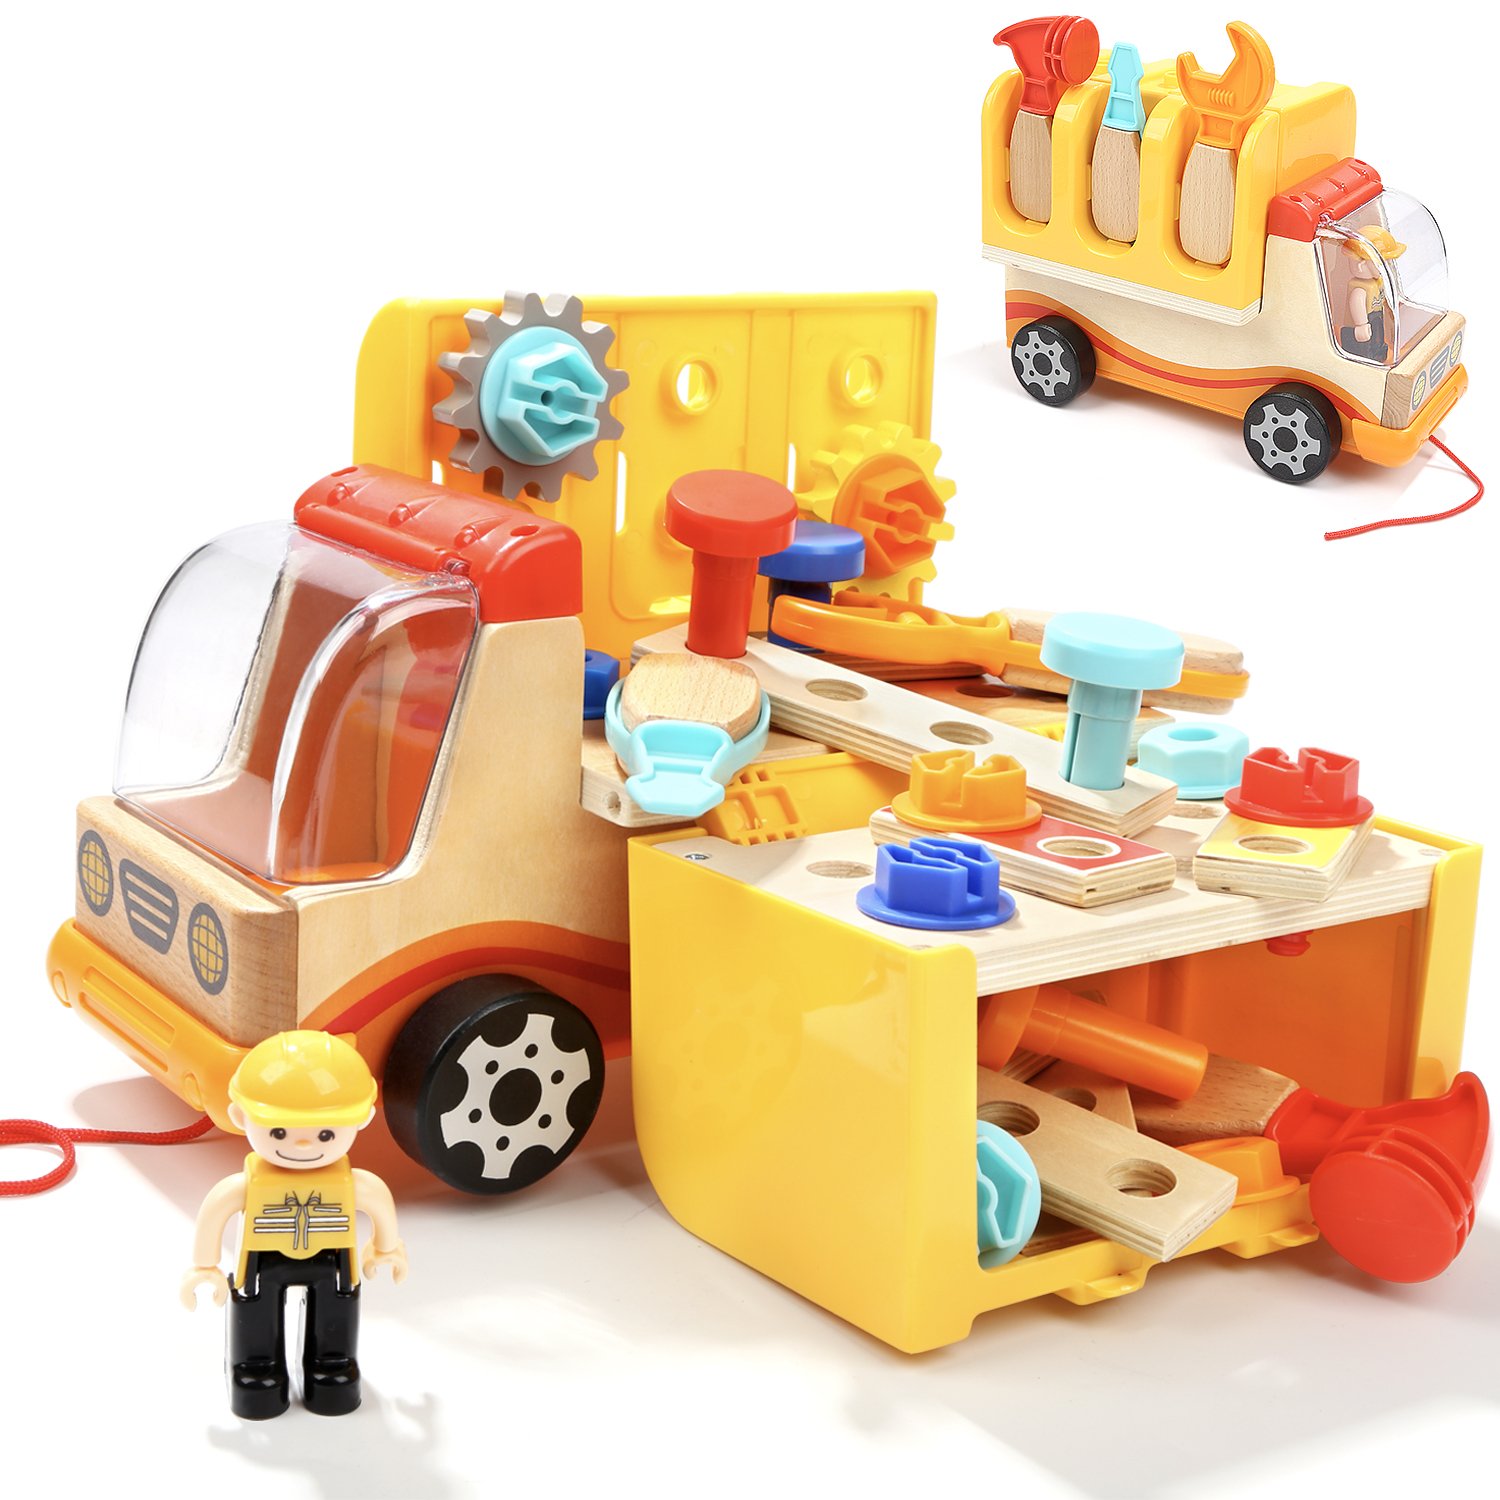 TOP BRIGHT Toddler Tools Set Toys for 2 Year Old Boy Gifts Kids Toy Truck